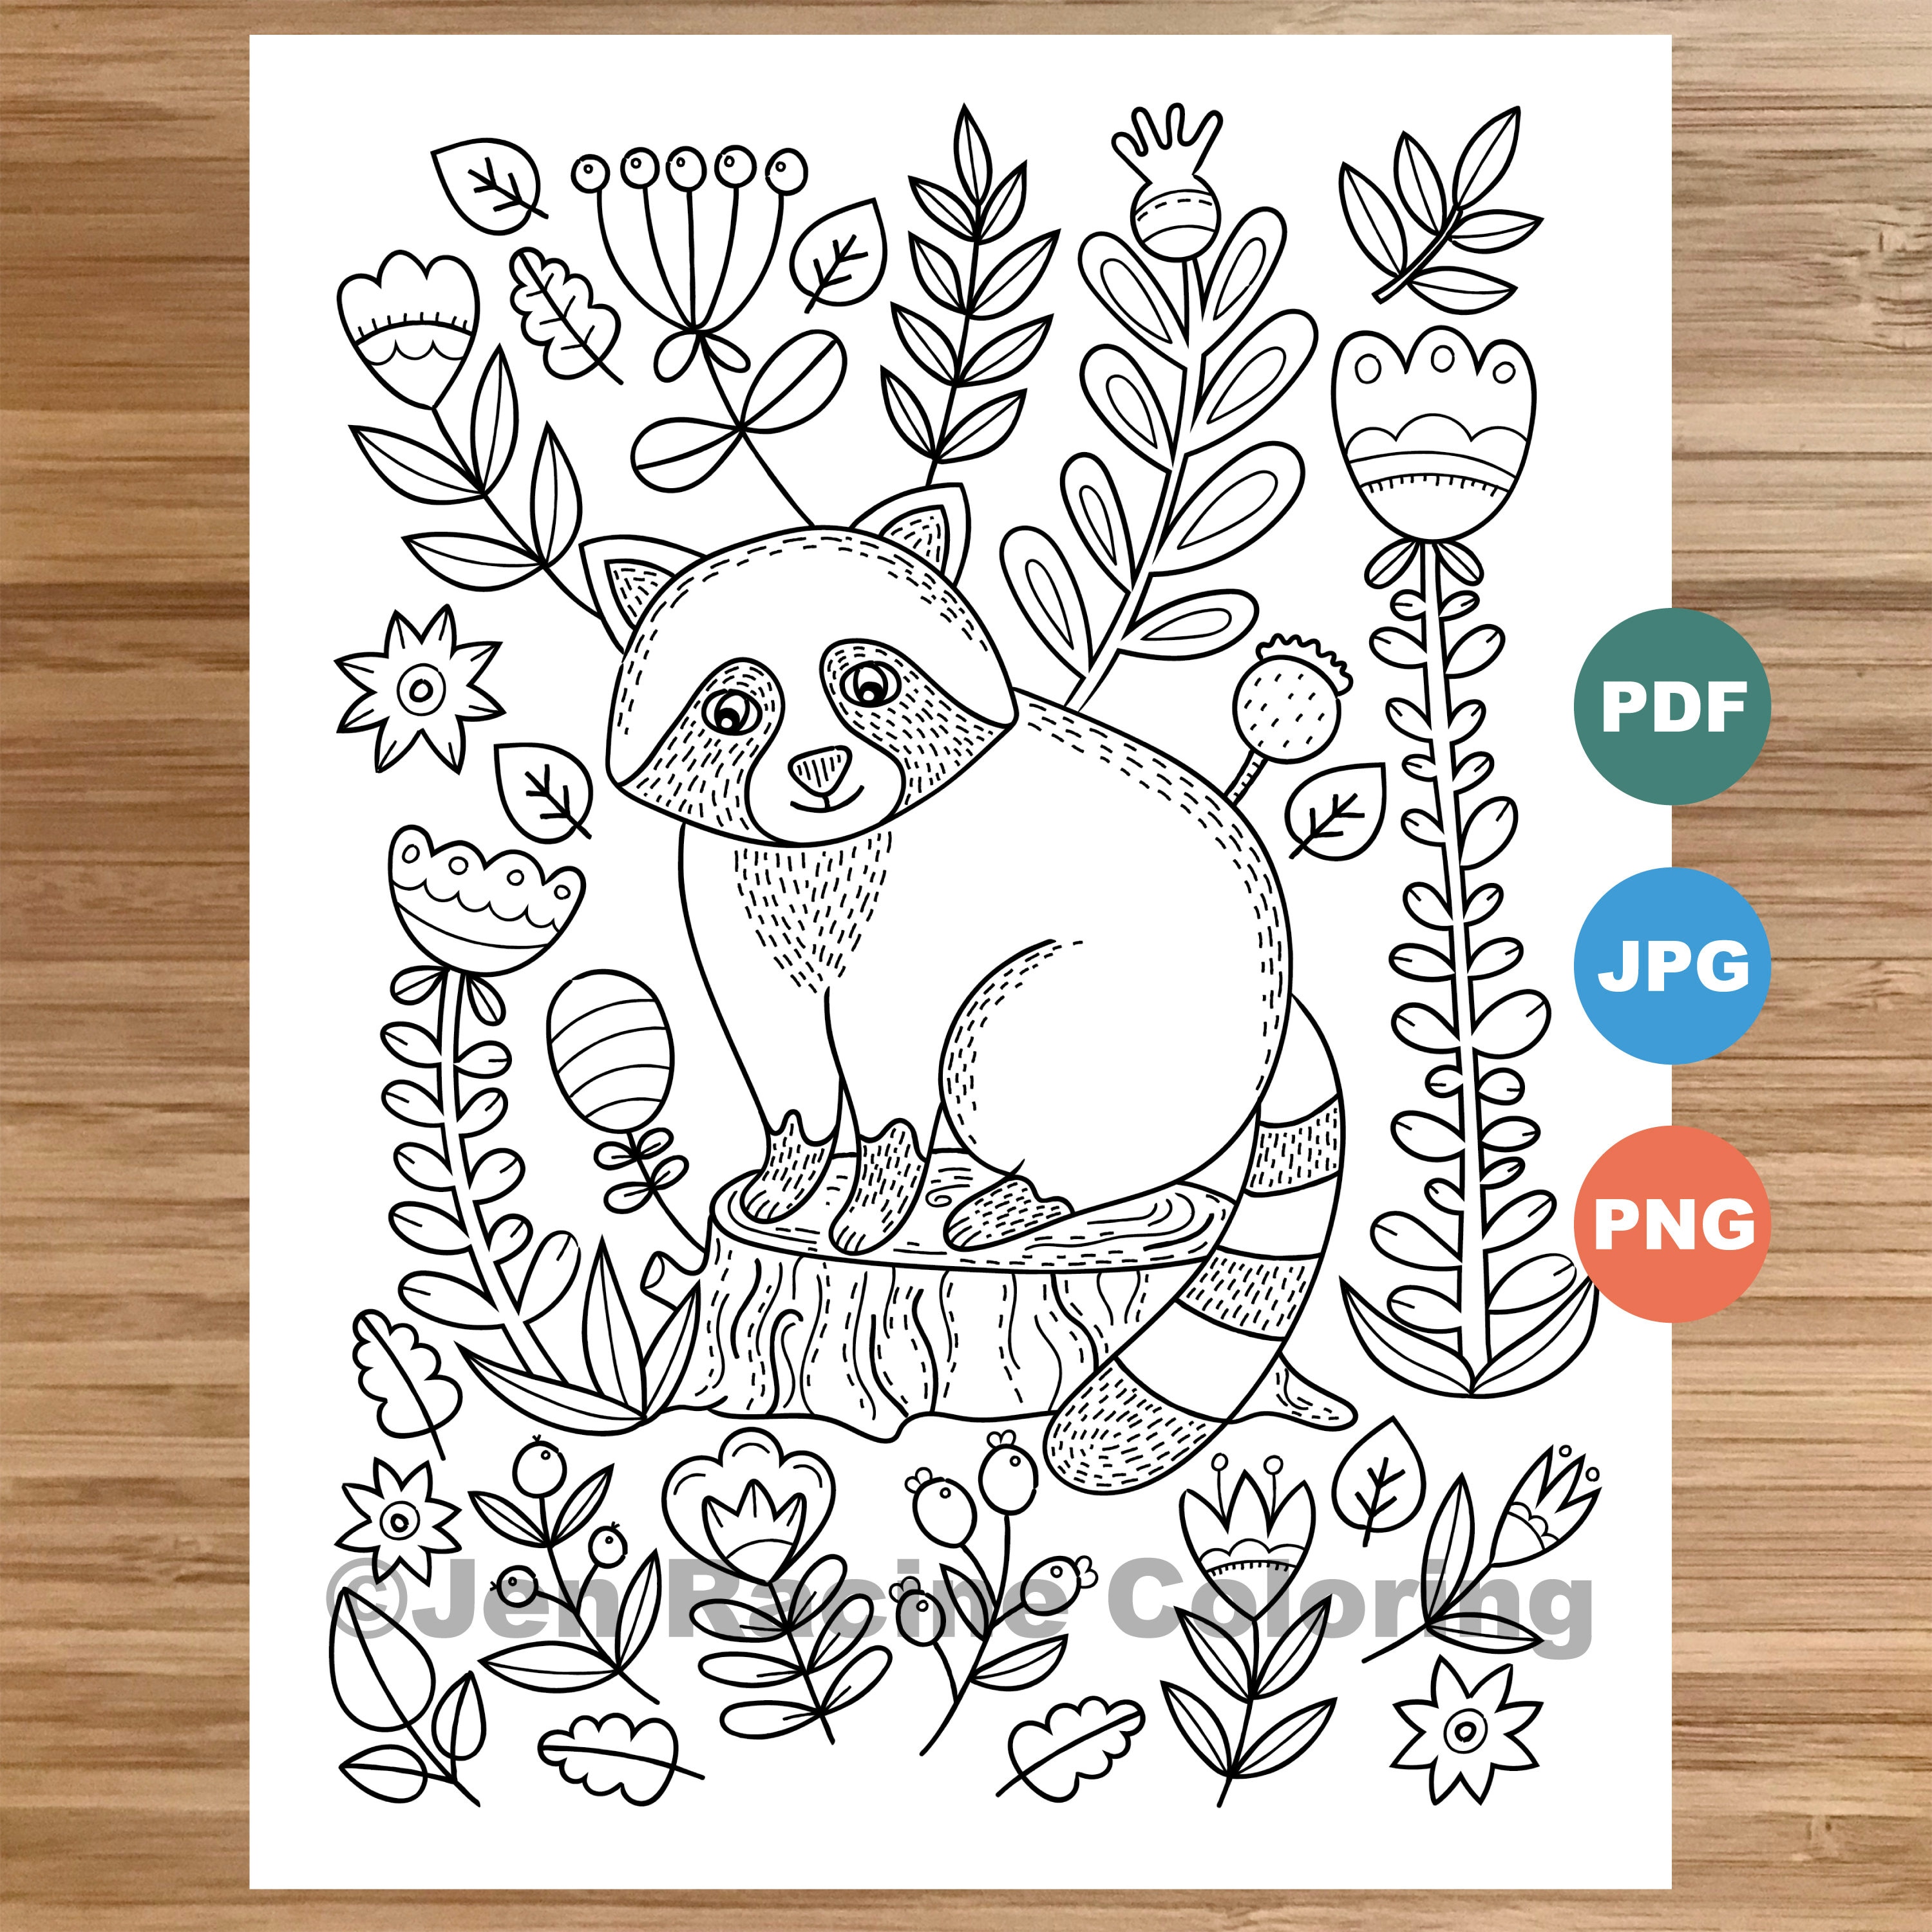 Woodland wonder coloring page raccoon floral scandinavian forest cozy coloring coloring page for kids